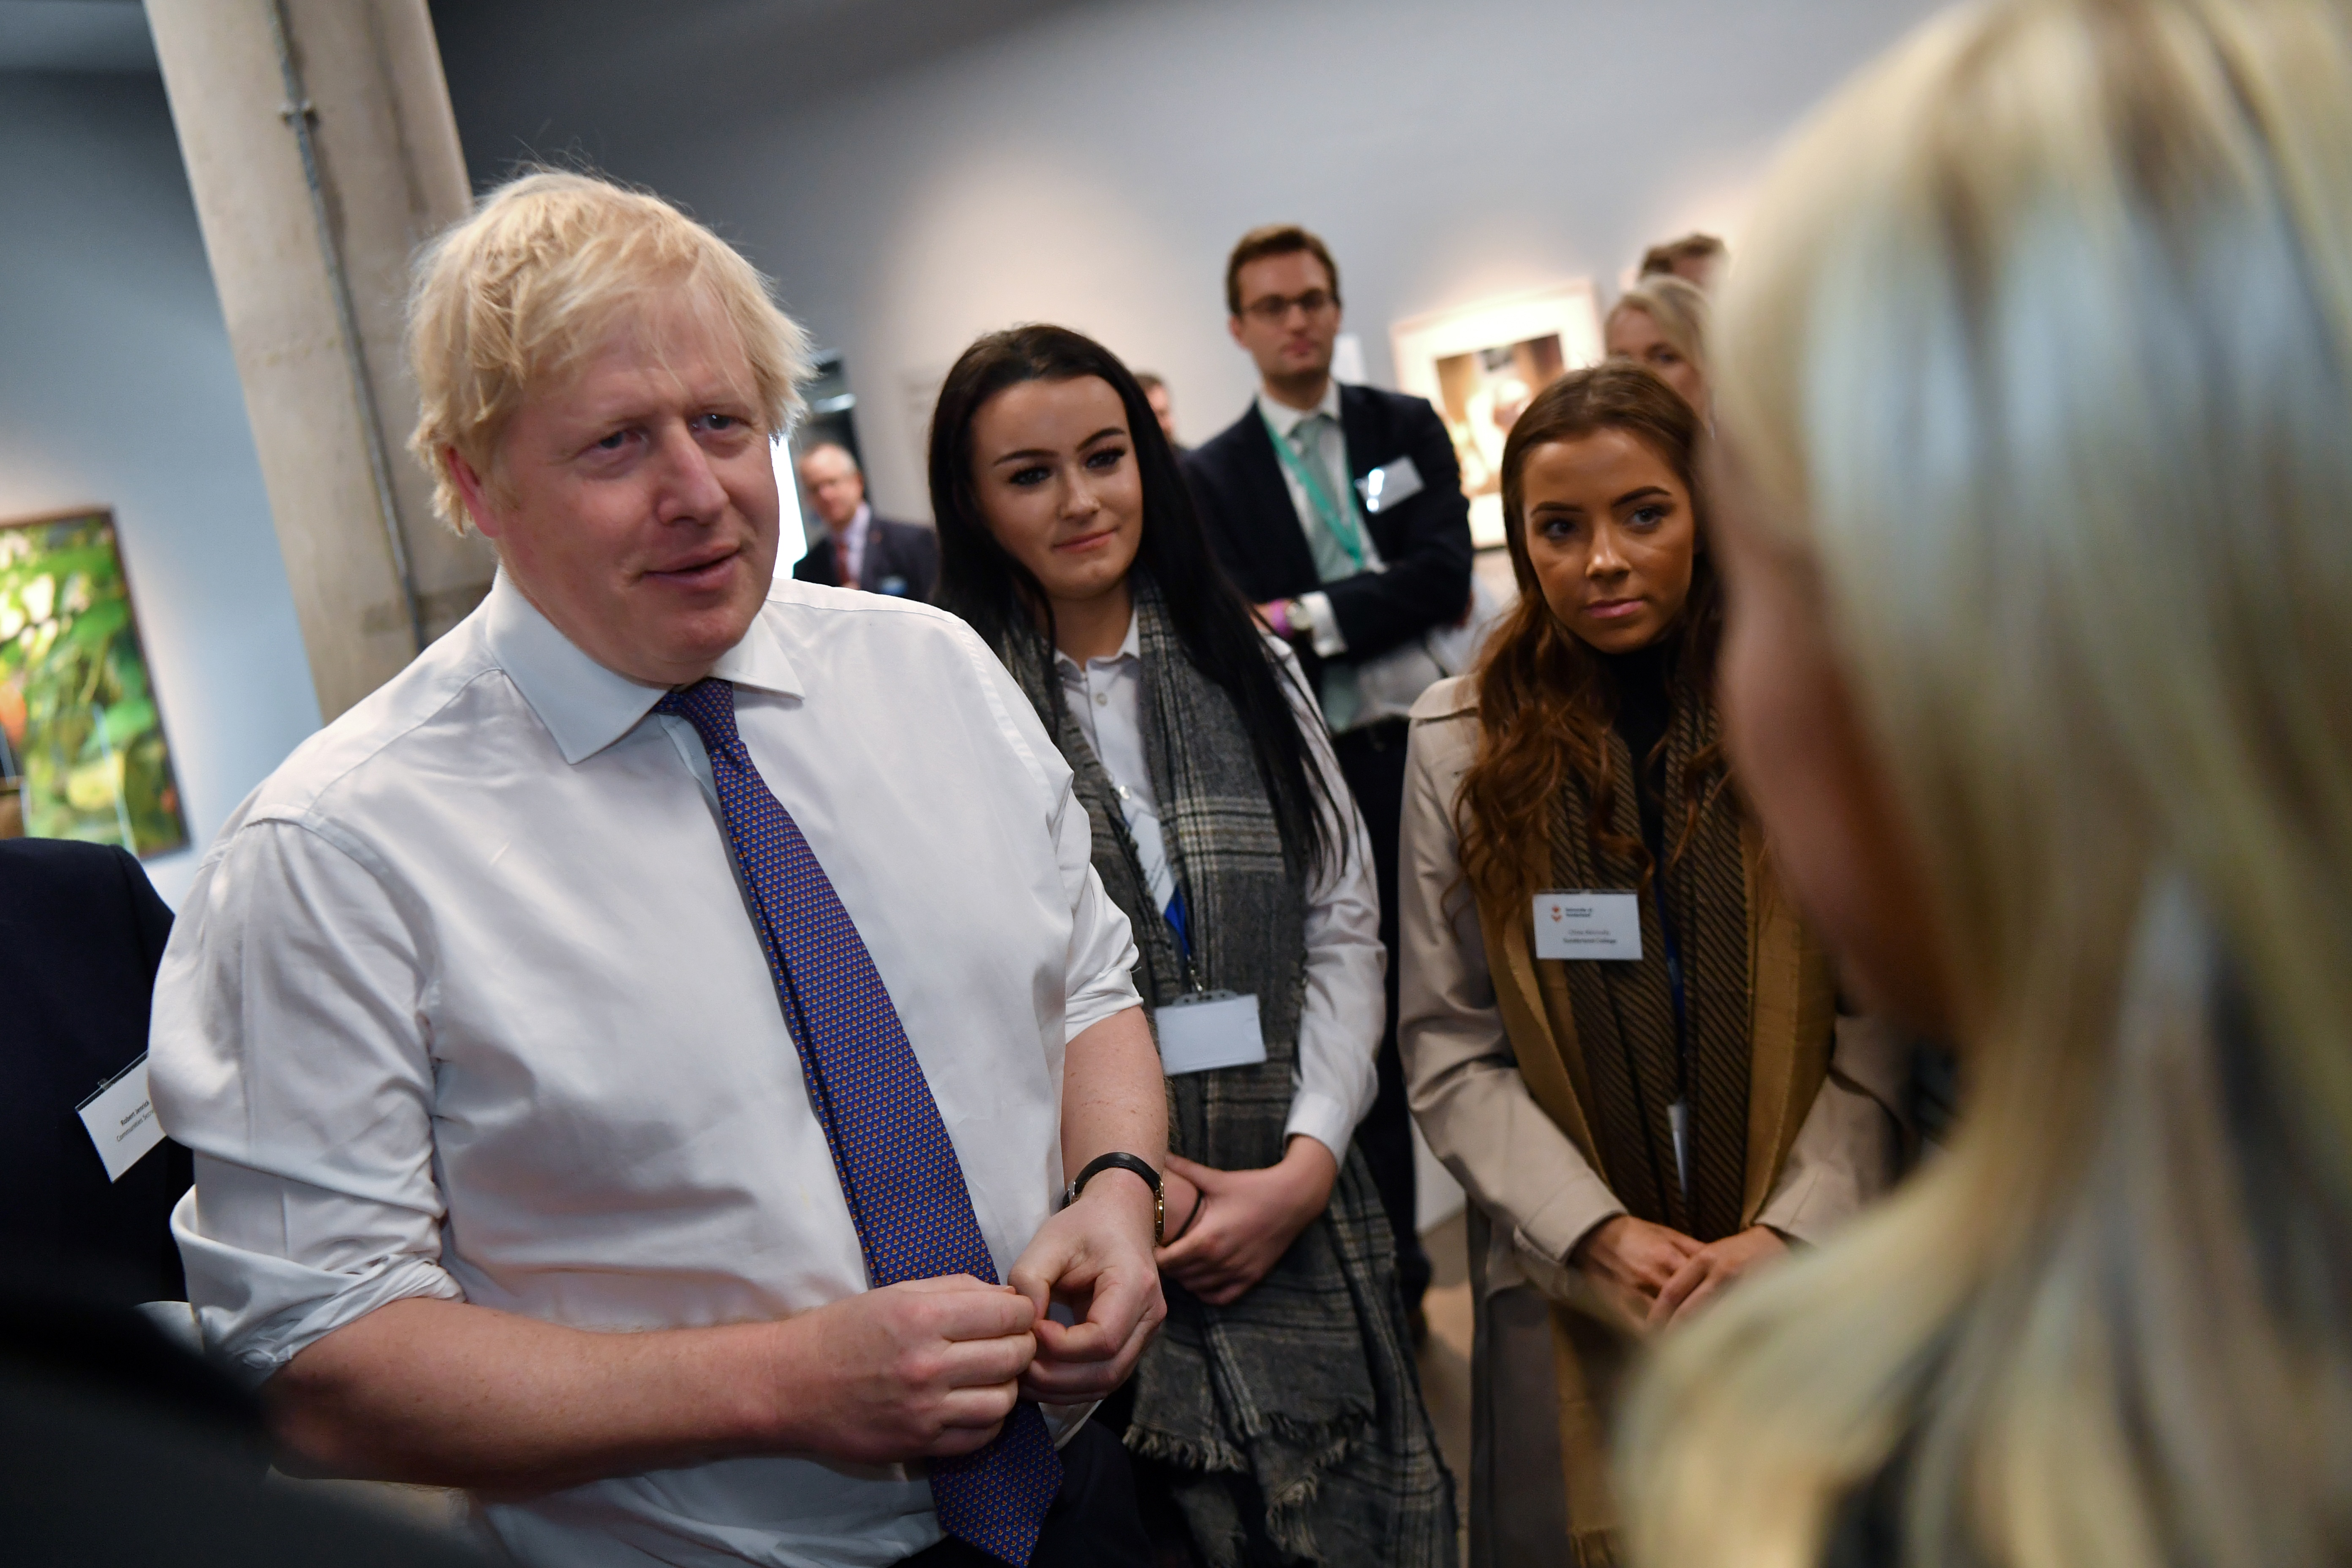 UK Prime Minister Boris Johnson meets local people in Sunderland before chairing a cabinet meeting there on Friday.